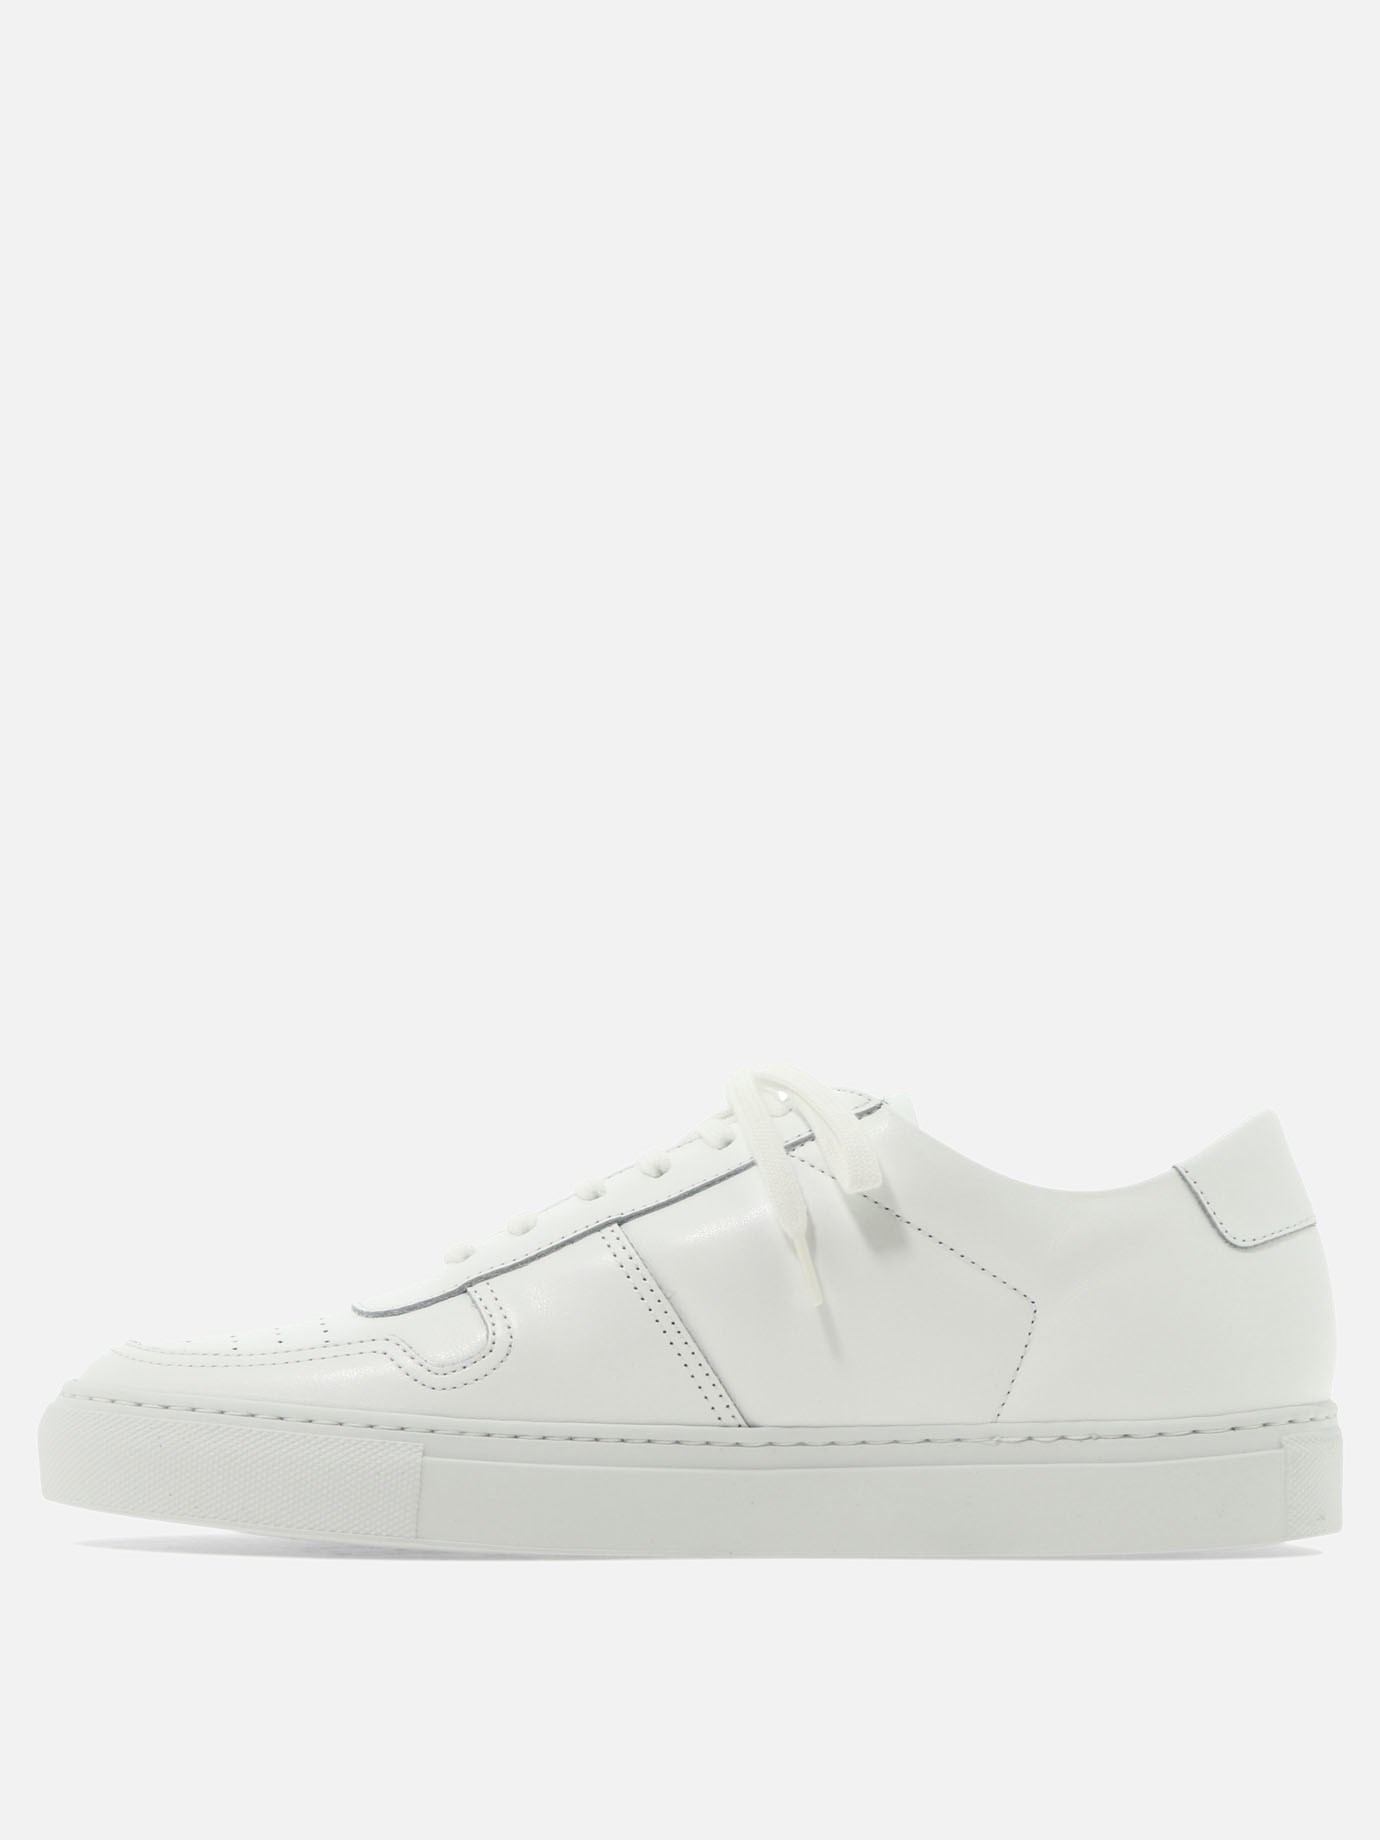 Sneaker  BBall  by Common Projects